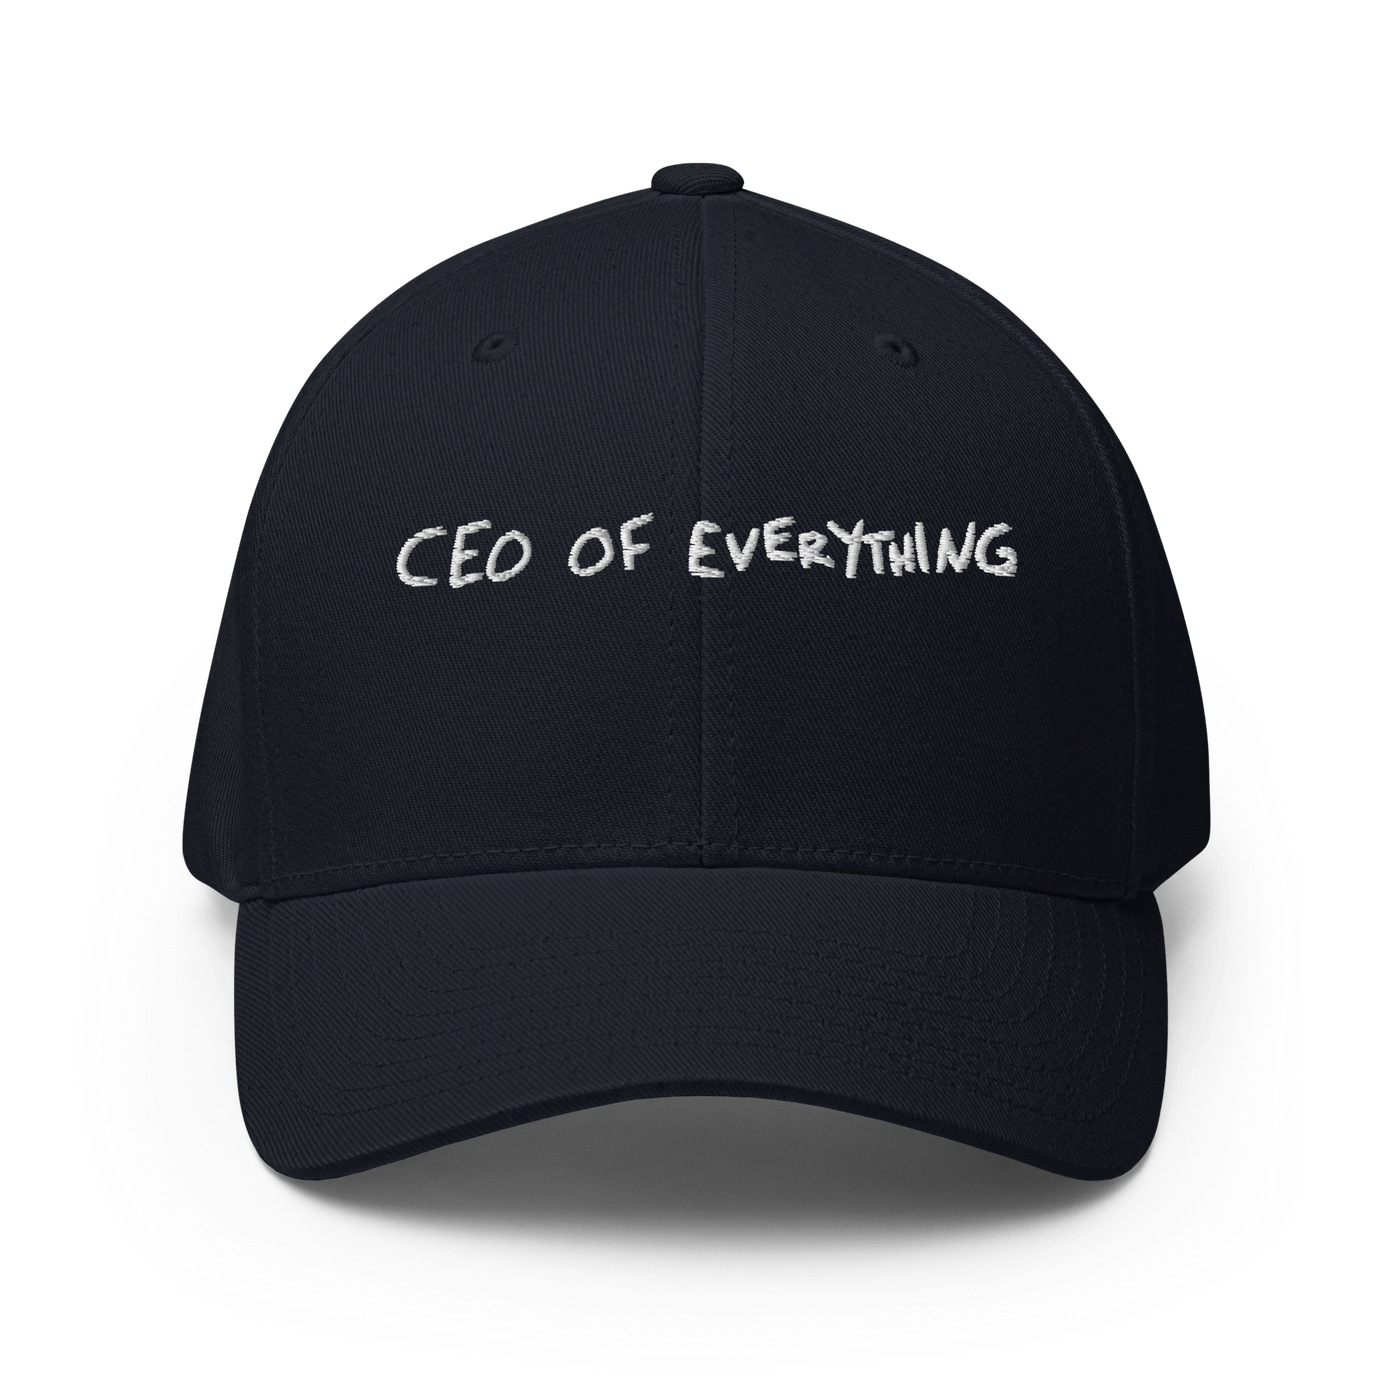 CEO of everything Flexfit cap - Black - S/M - Just Another Cap Store